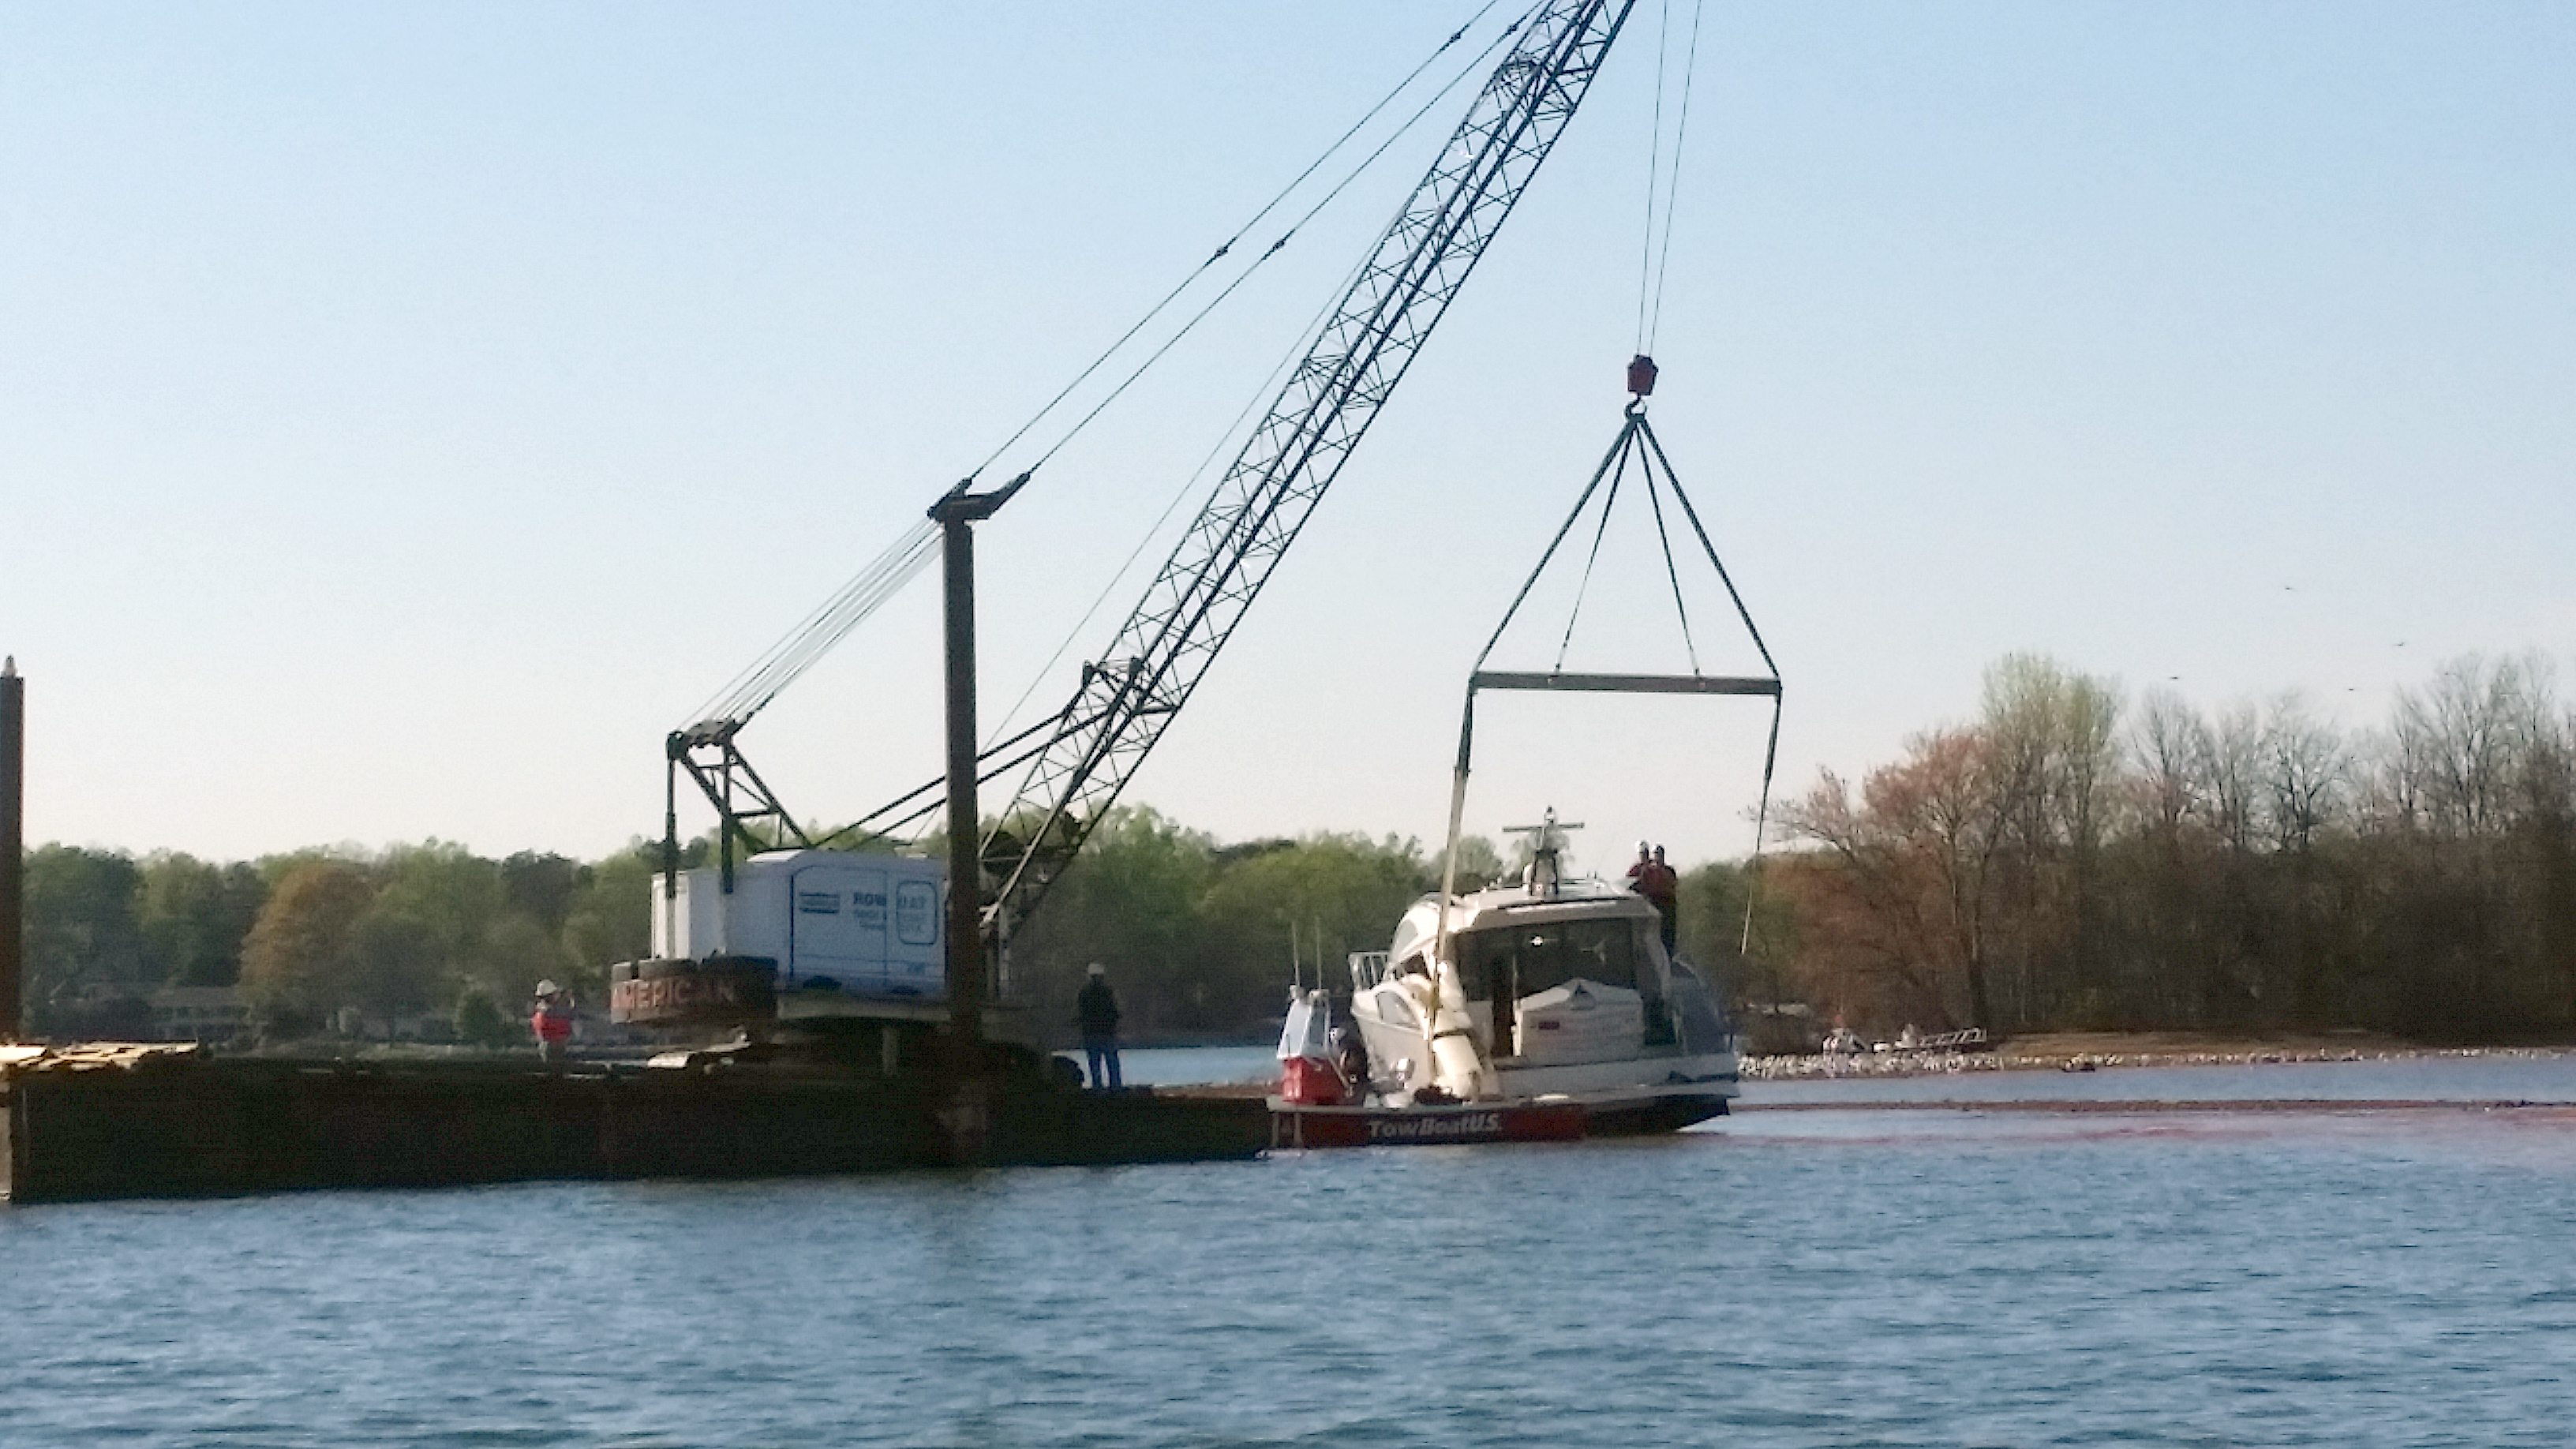 Crane is up to tension and the yacht is no longer listing